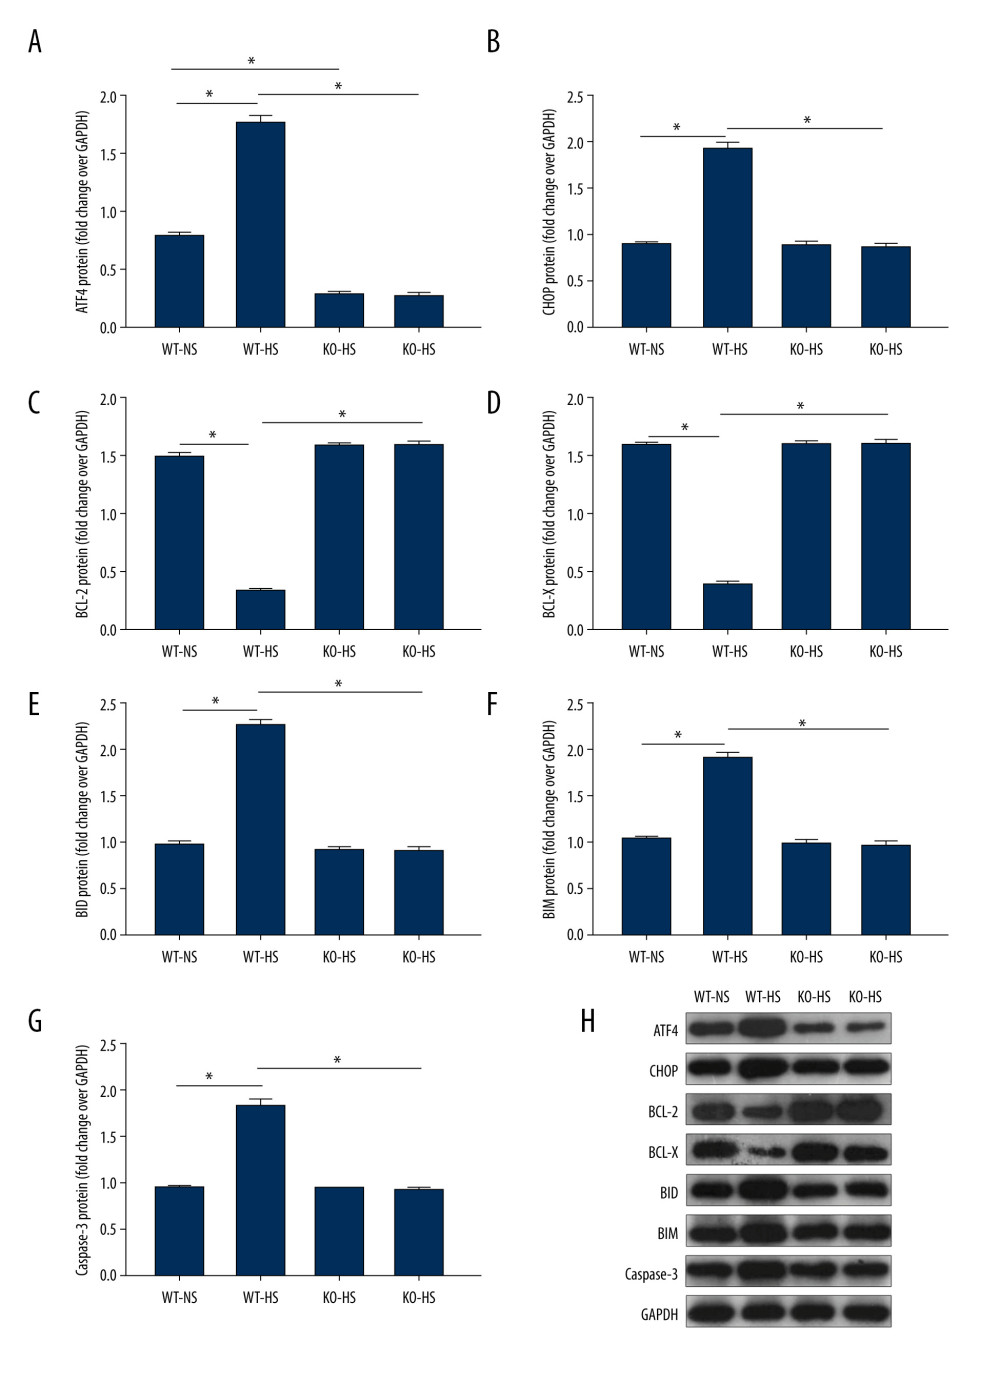 The proteins expression of endoplasmic reticulum stress and apoptosis-related genes in of activating transcription factor 4 (ATF4) knockout mice induced by high salt. (A–G) ATF4, C/EBP-homologous protein (CHOP), BCL-2, BCL-X, BH3-interacting domain death agonist (BID), Bcl-2-like protein 11 (BIM), caspase-3 protein expression. (H) Western blotting of indicated proteins. WT-NS – wild-type+normal salt group; WT-HS – wild-type+high salt group; KO-NS – ATF4+/−+normal salt group; KO-HS – ATF4+/−+high salt group. * P<0.05.